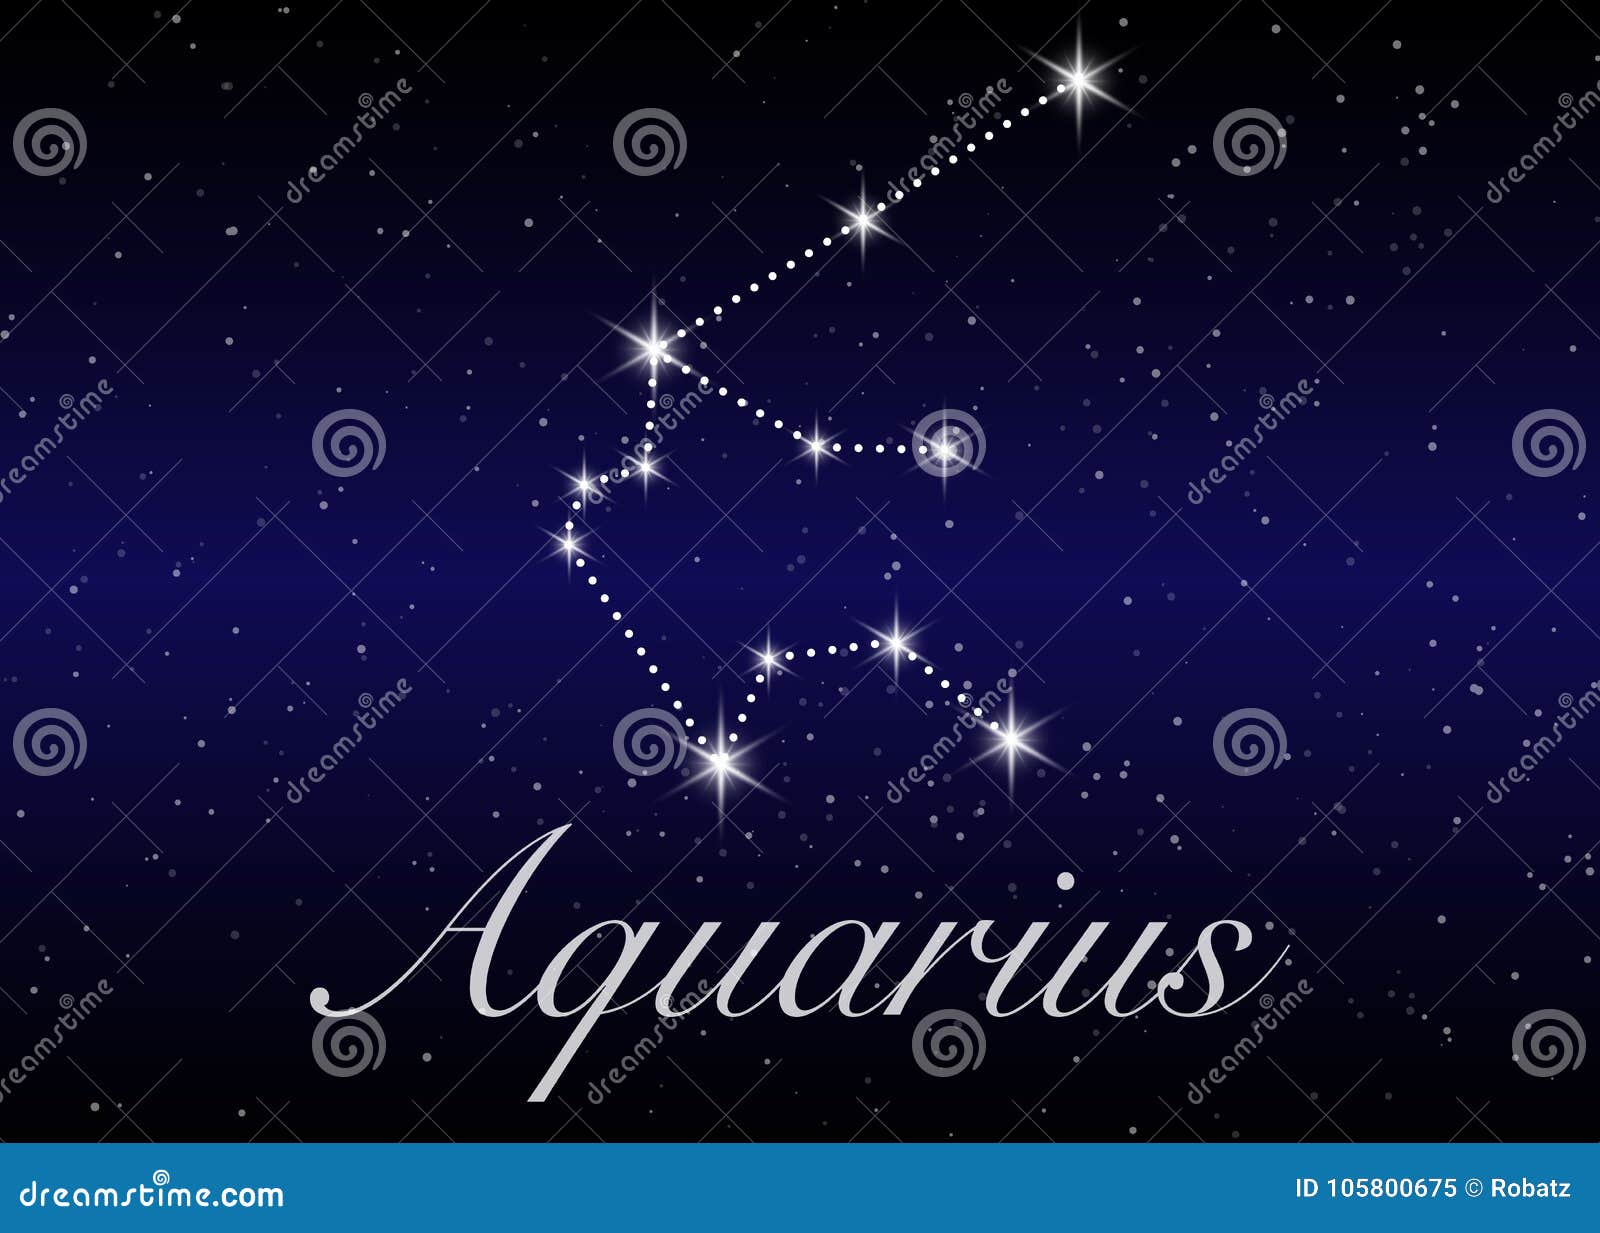 Aquarius Zodiac Constellations Sign on Beautiful Starry Sky with Galaxy ...